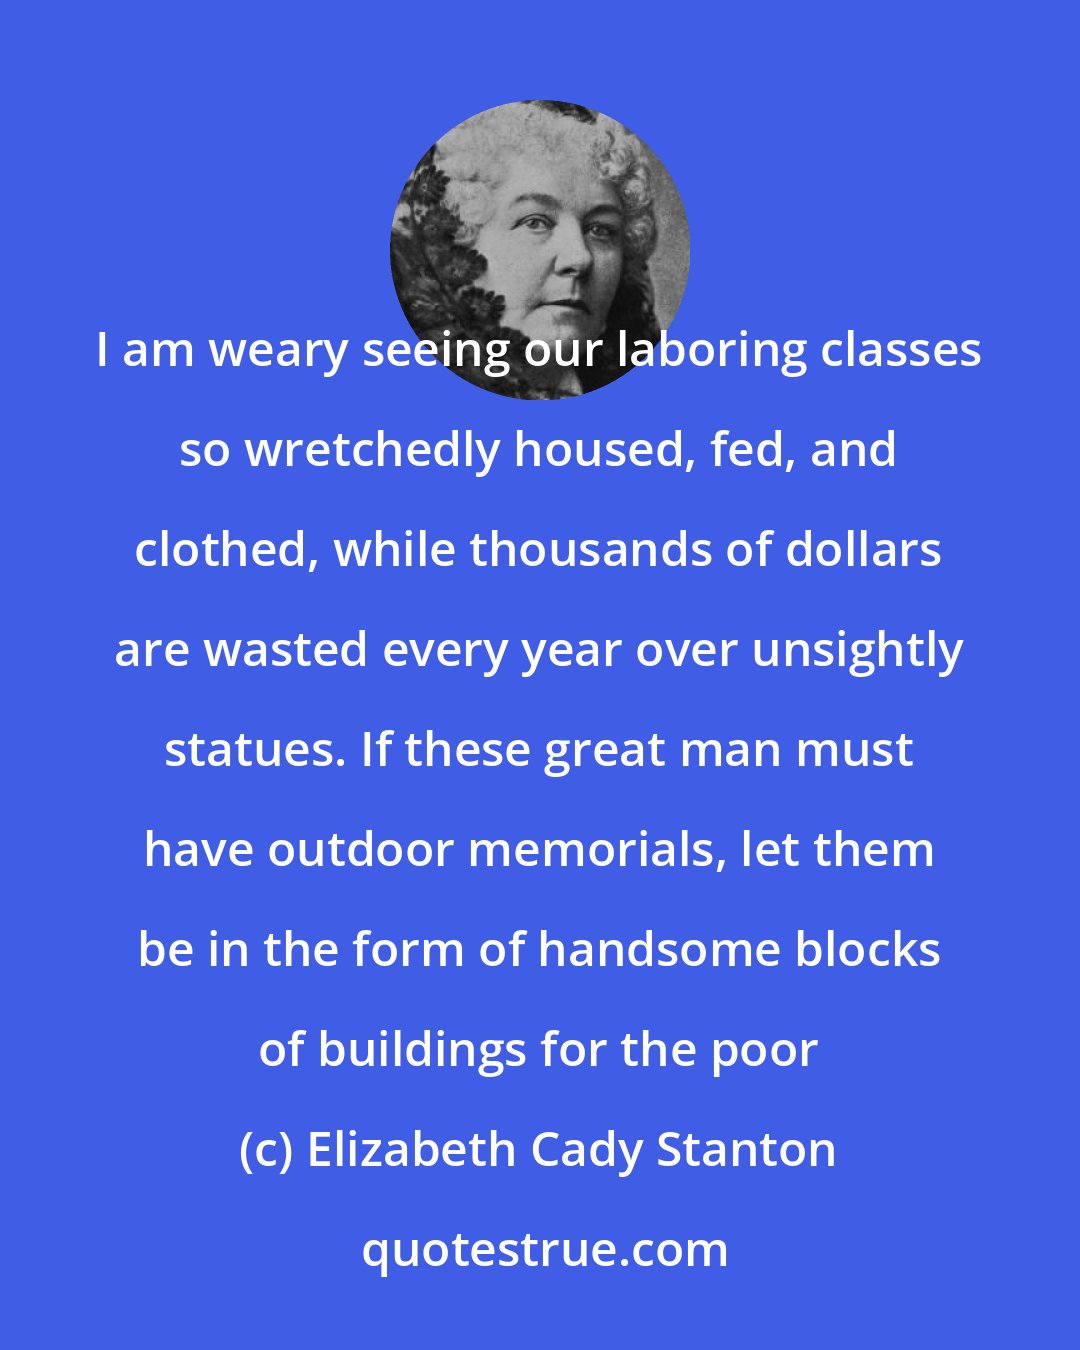 Elizabeth Cady Stanton: I am weary seeing our laboring classes so wretchedly housed, fed, and clothed, while thousands of dollars are wasted every year over unsightly statues. If these great man must have outdoor memorials, let them be in the form of handsome blocks of buildings for the poor